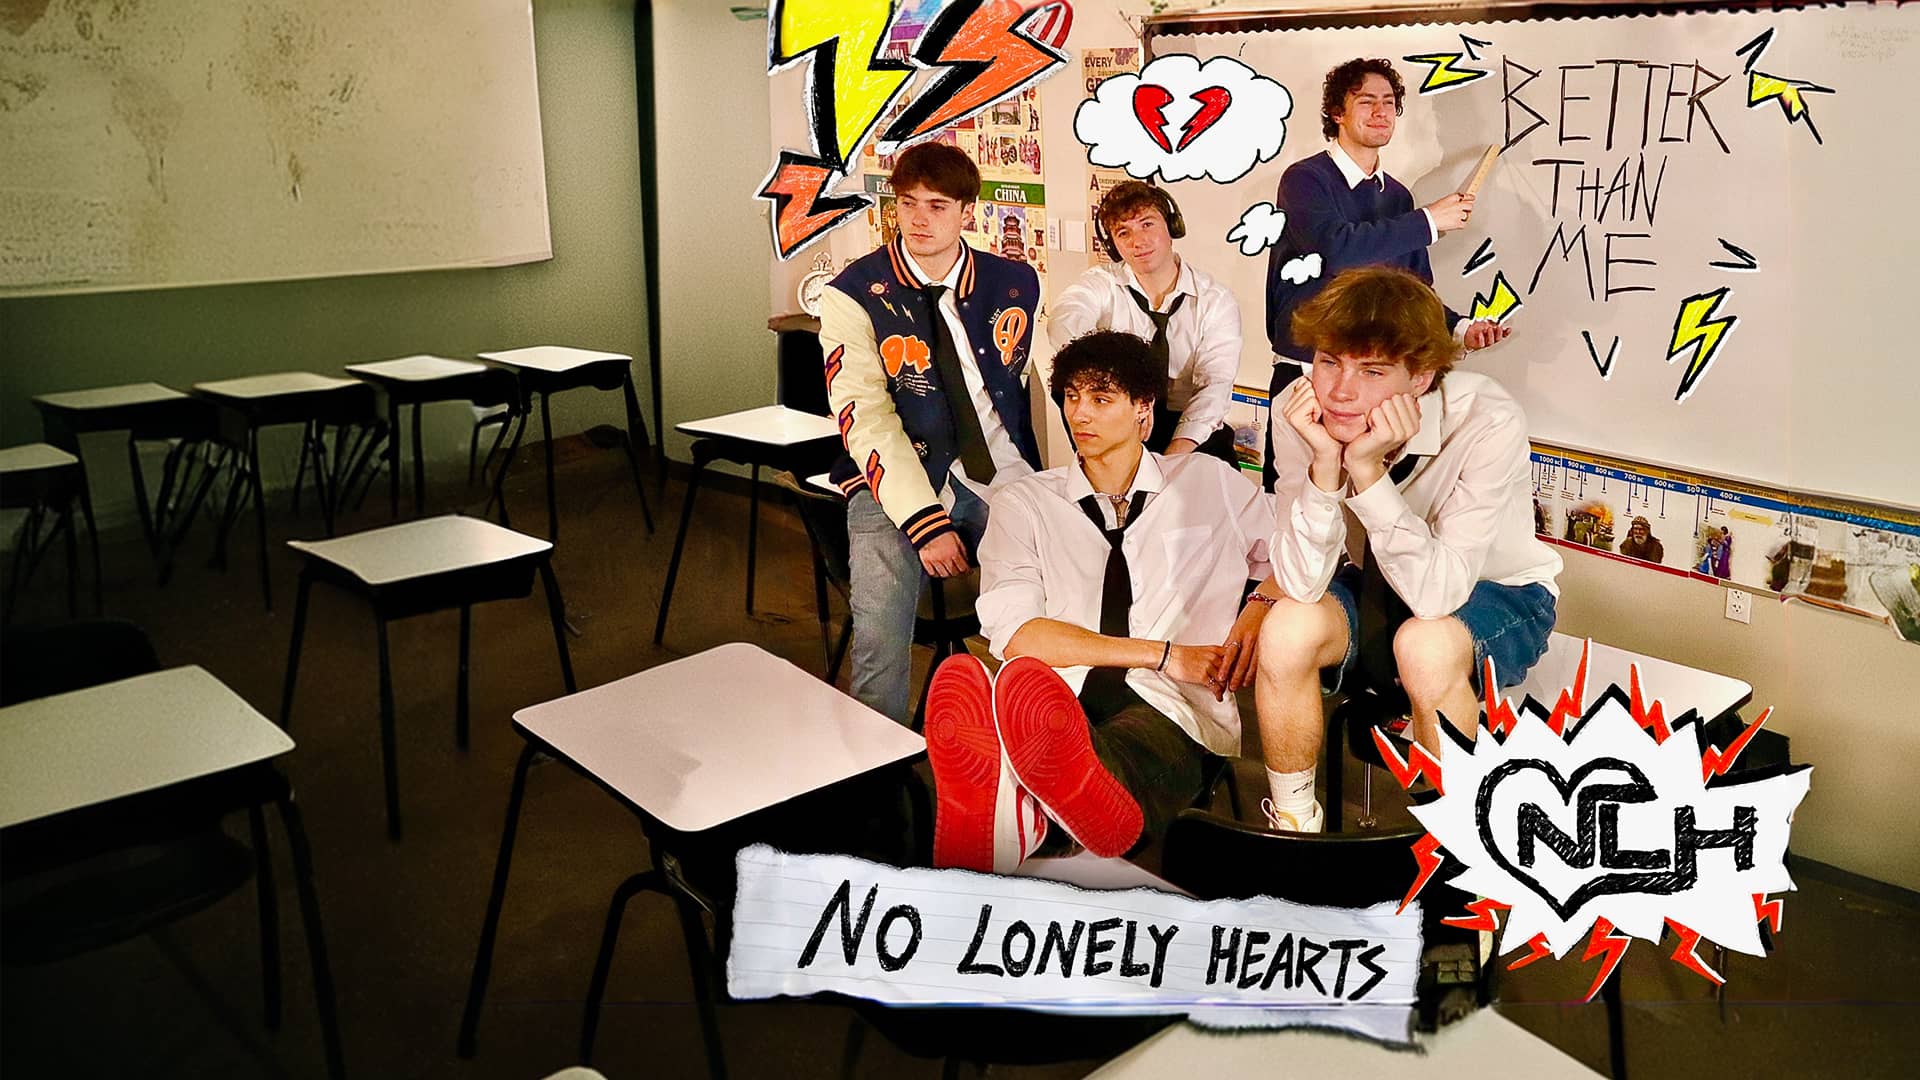 Band members of No Lonely Hearts posing in a classroom with 'Better Than Me' doodles.